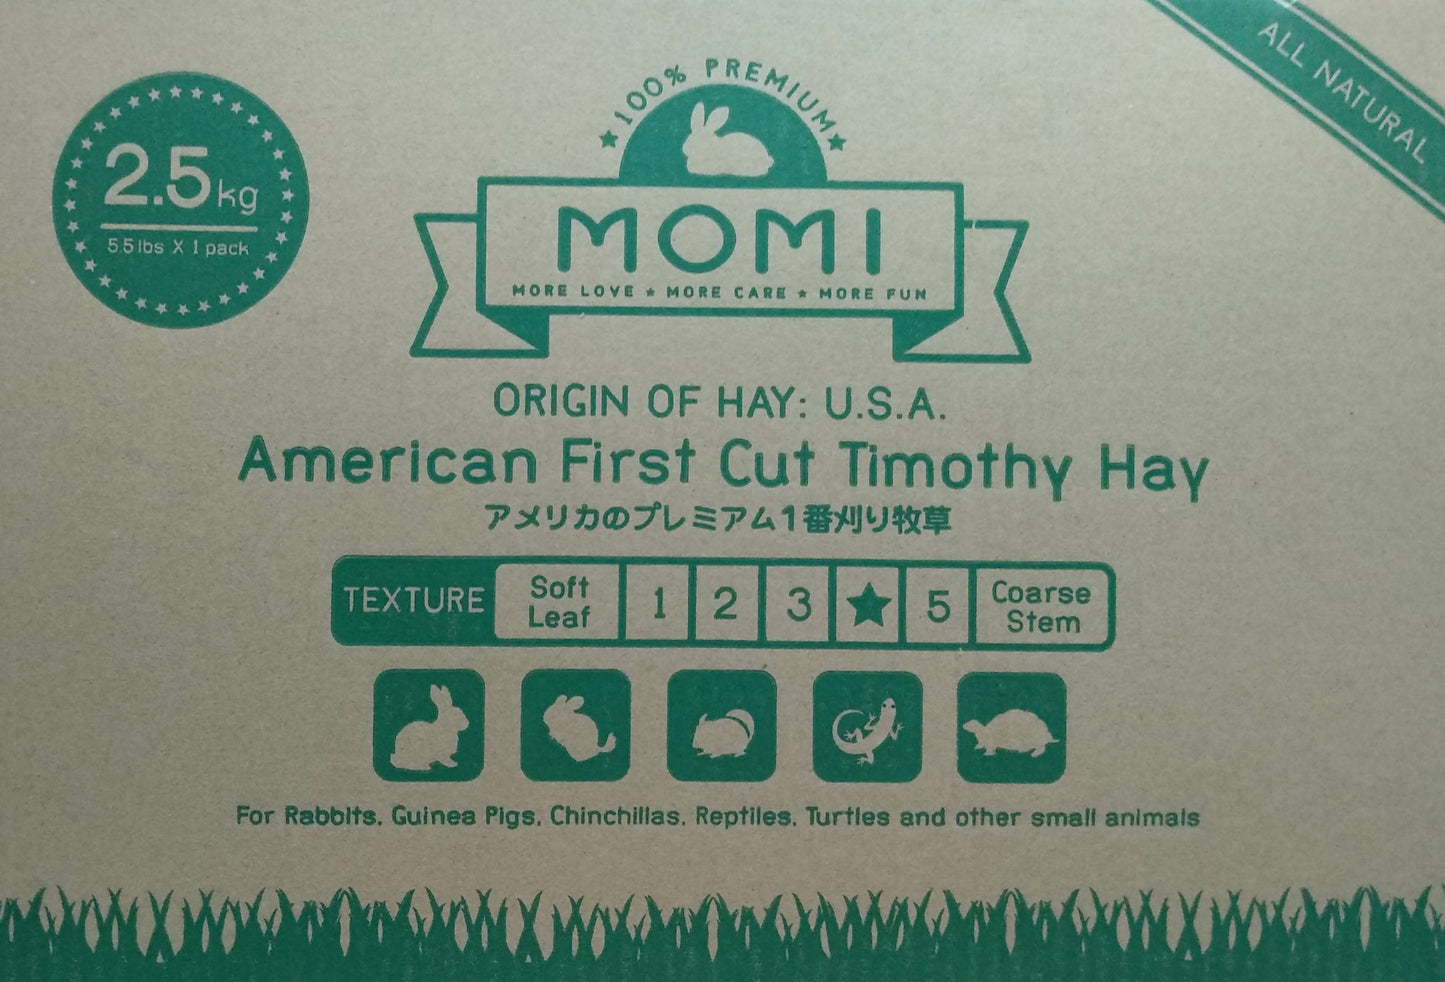 Momi First Cut Timothy 2.5Kg (with box)